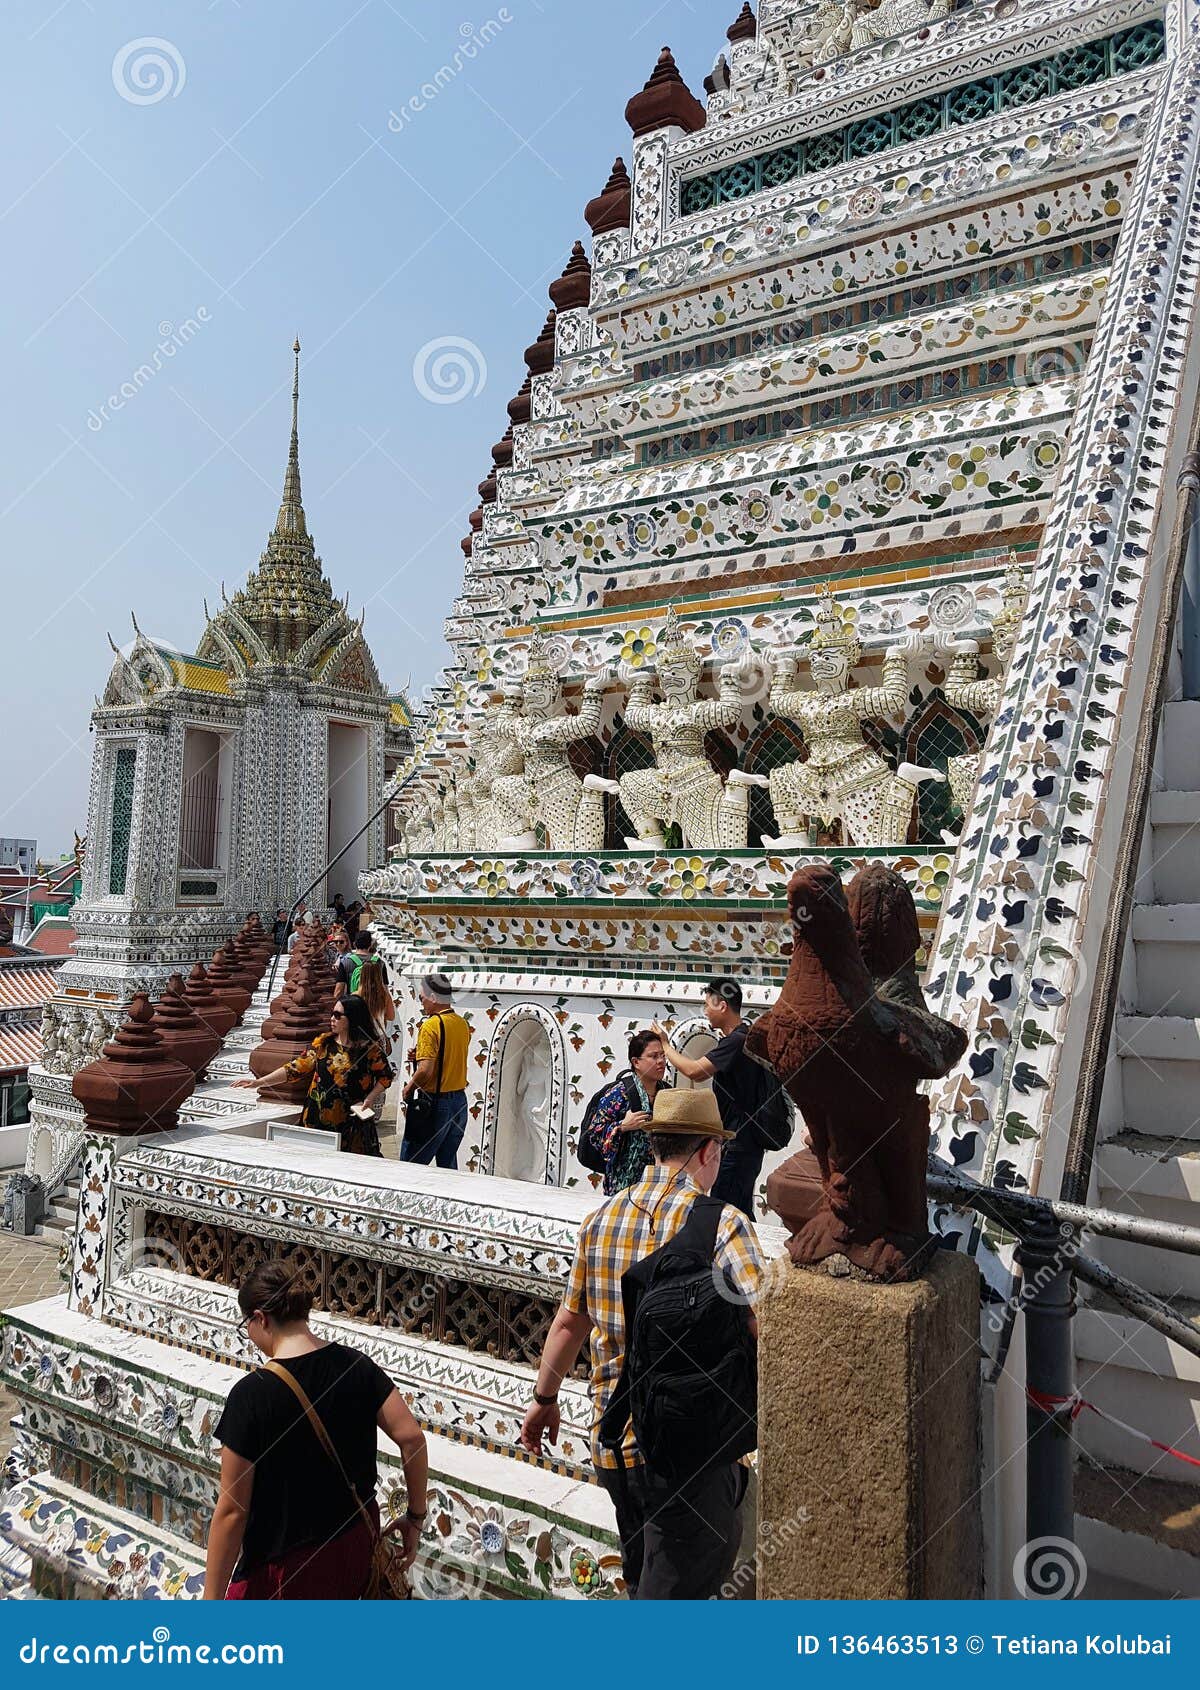 Famous Temple Of Wat Arun In Bangkok Decorated With Porcelain And Images, Photos, Reviews